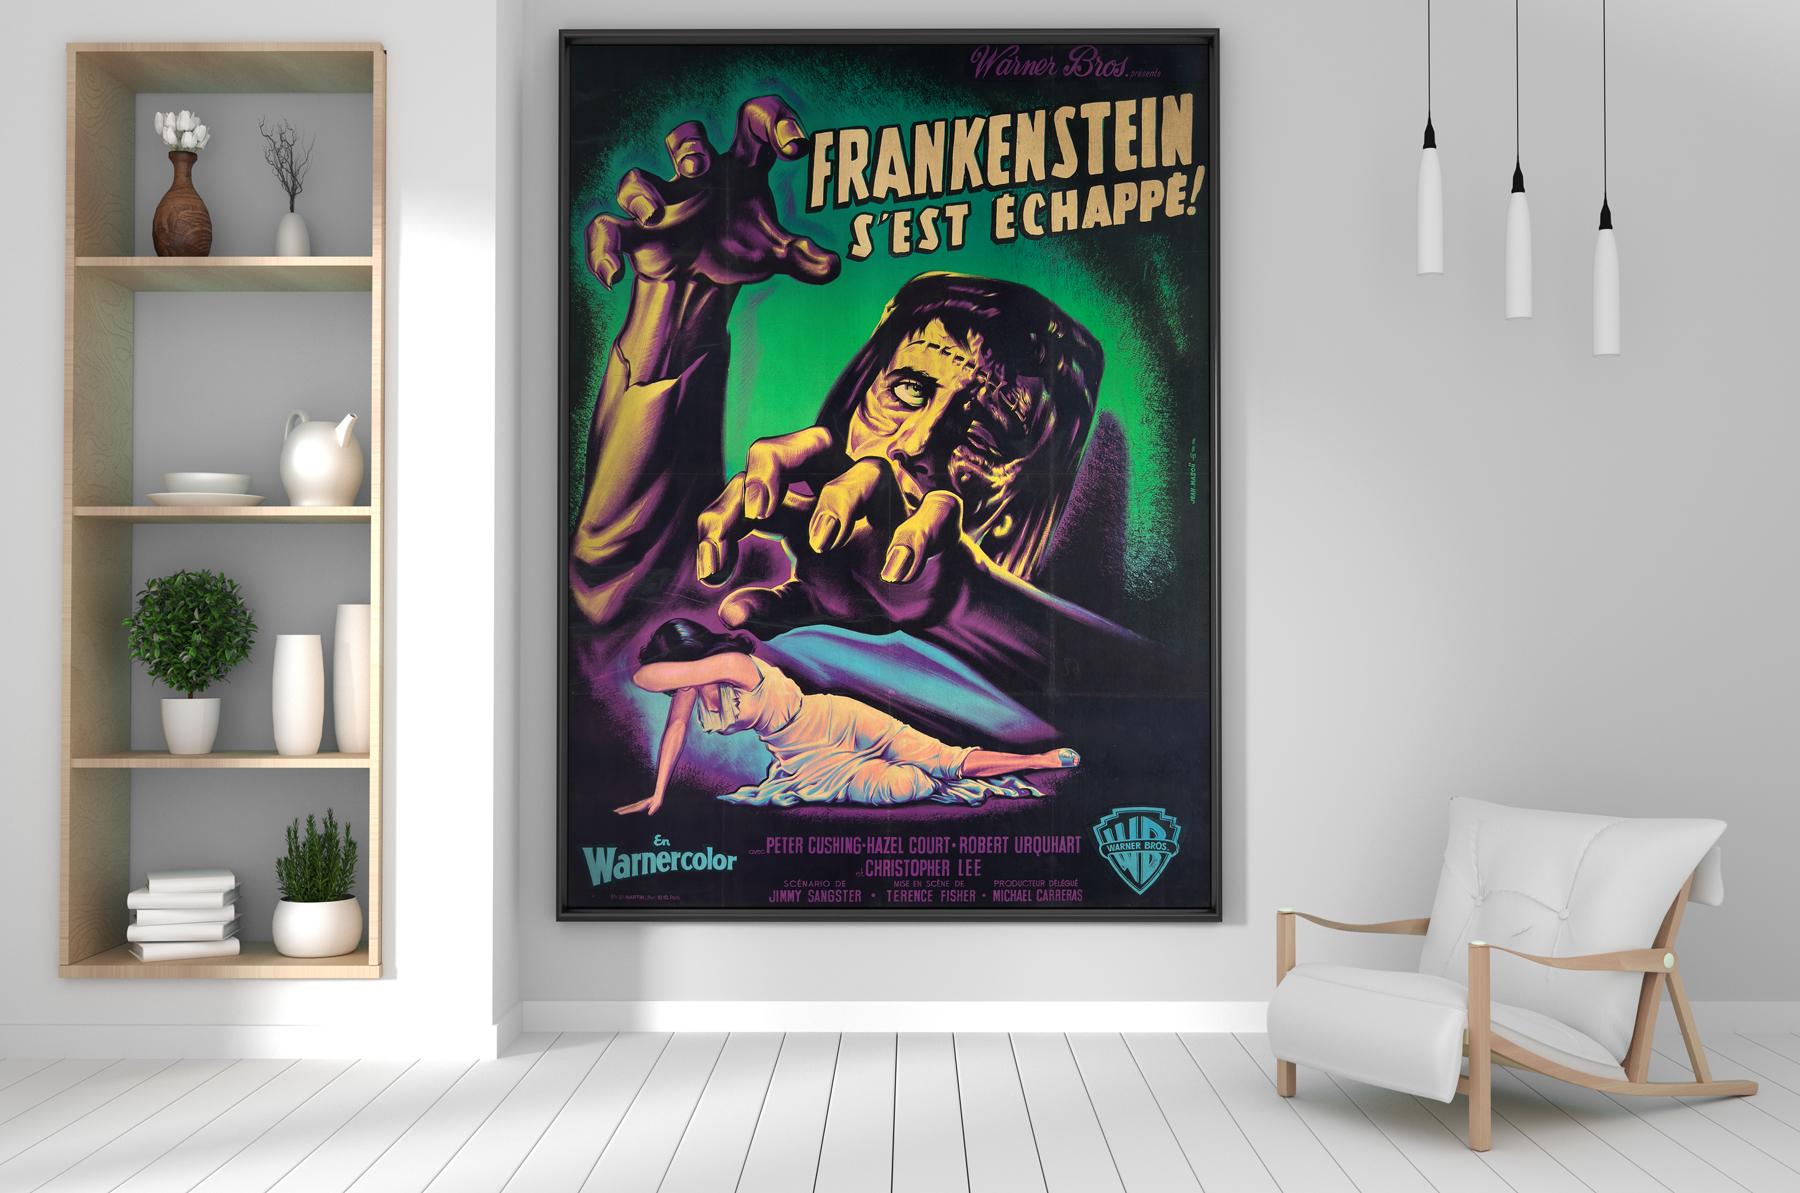 The Curse of Frankenstein (Frankenstein S'est Echappe), classic 1957 British horror by Hammer Film Productions, loosely based on the 1818 novel Frankenstein. This first-year-of-release French Grande film poster is a fantastic poster and features a